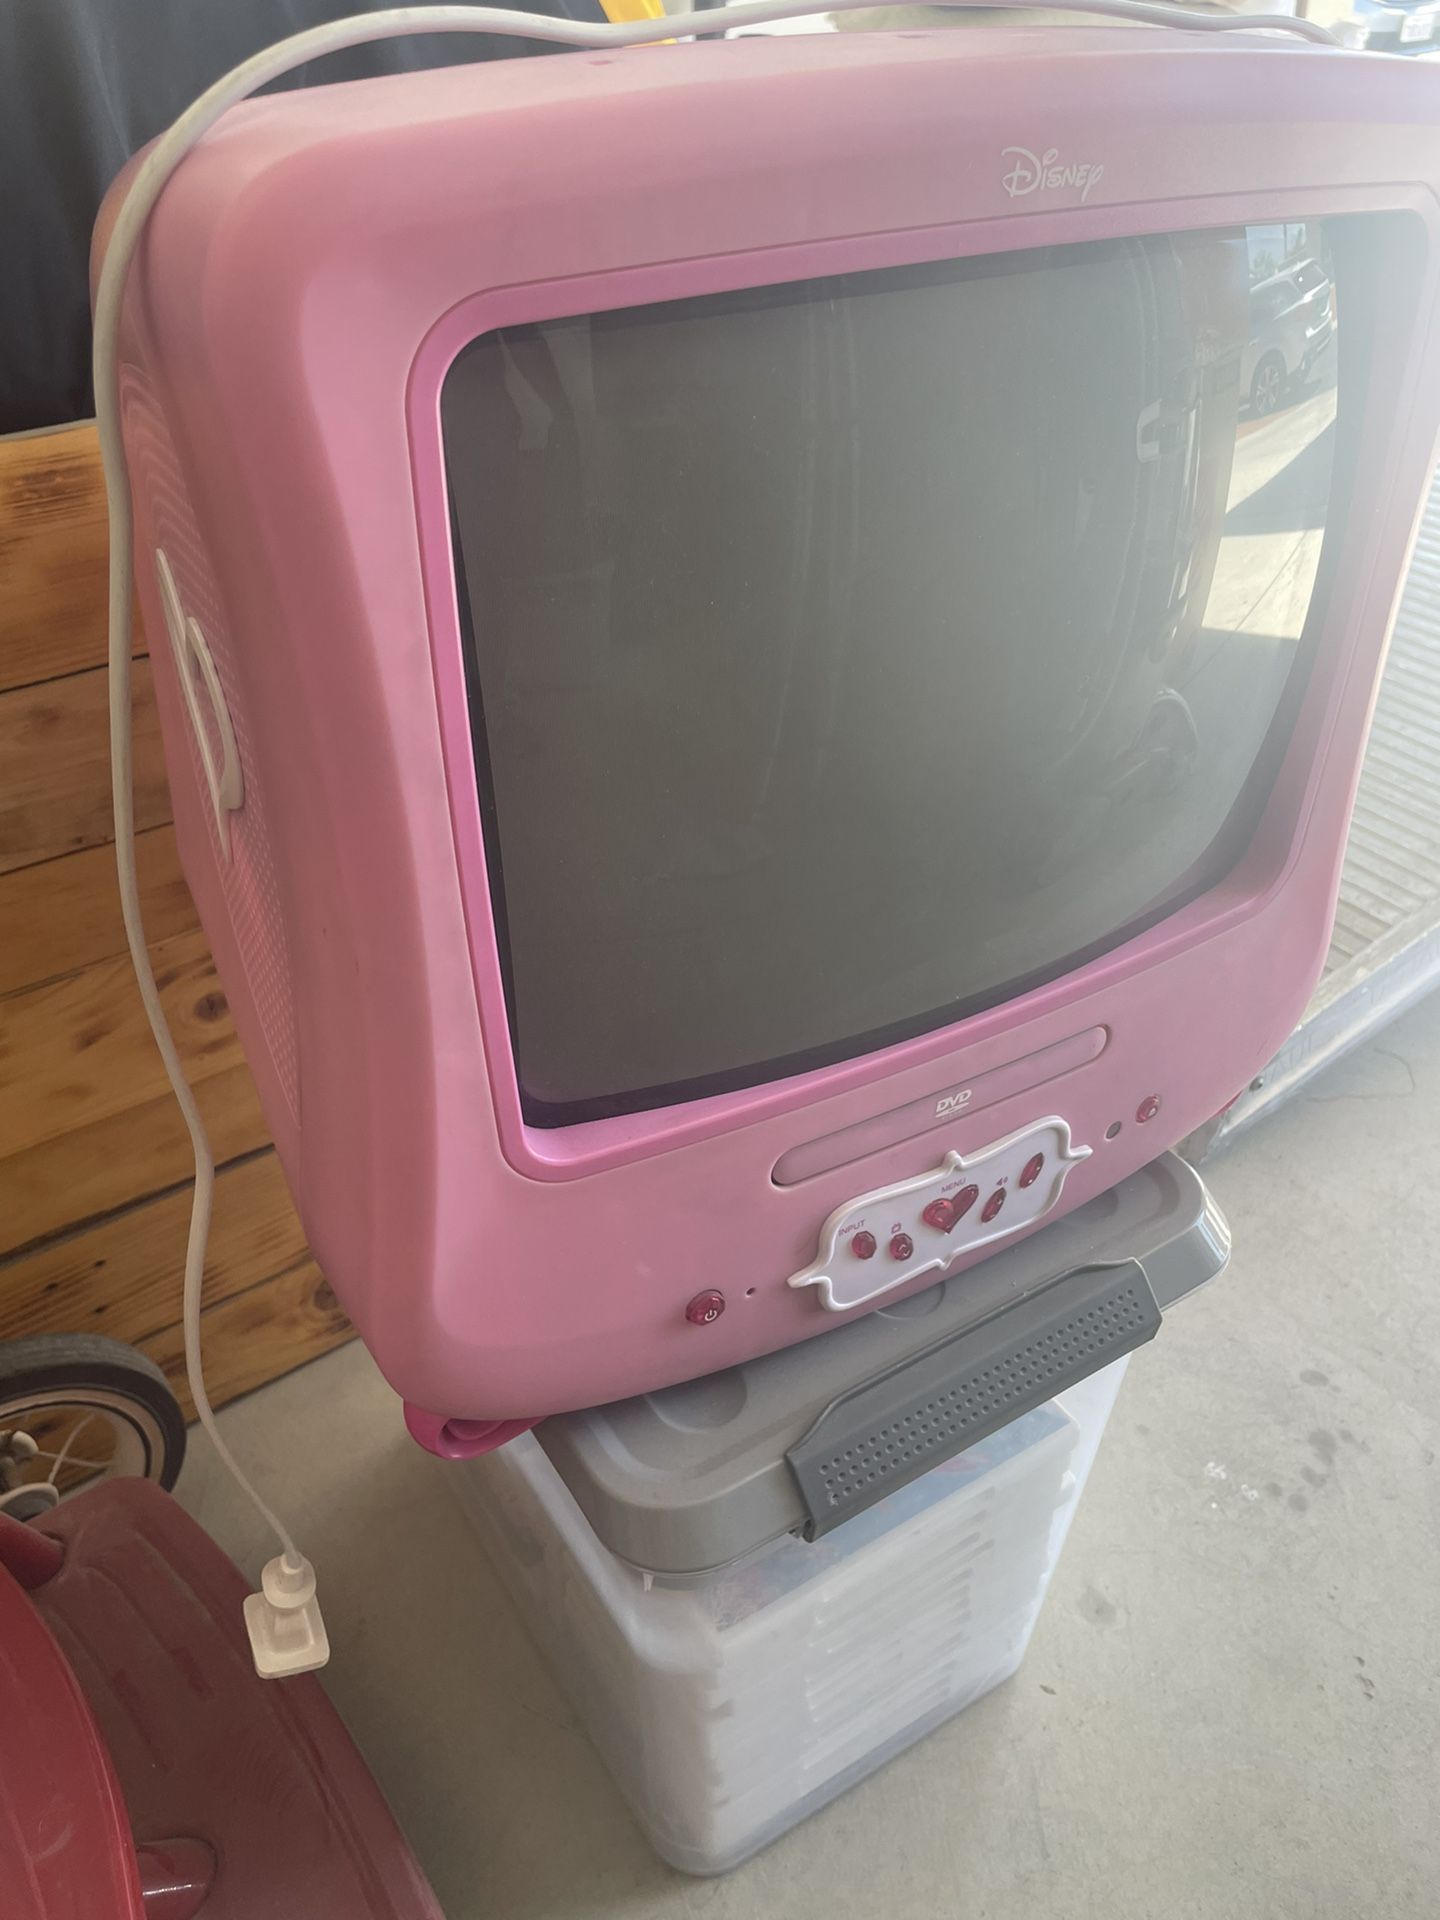 Disney Princess TV/DVD Player With Barbie DVDs for Sale in Indio